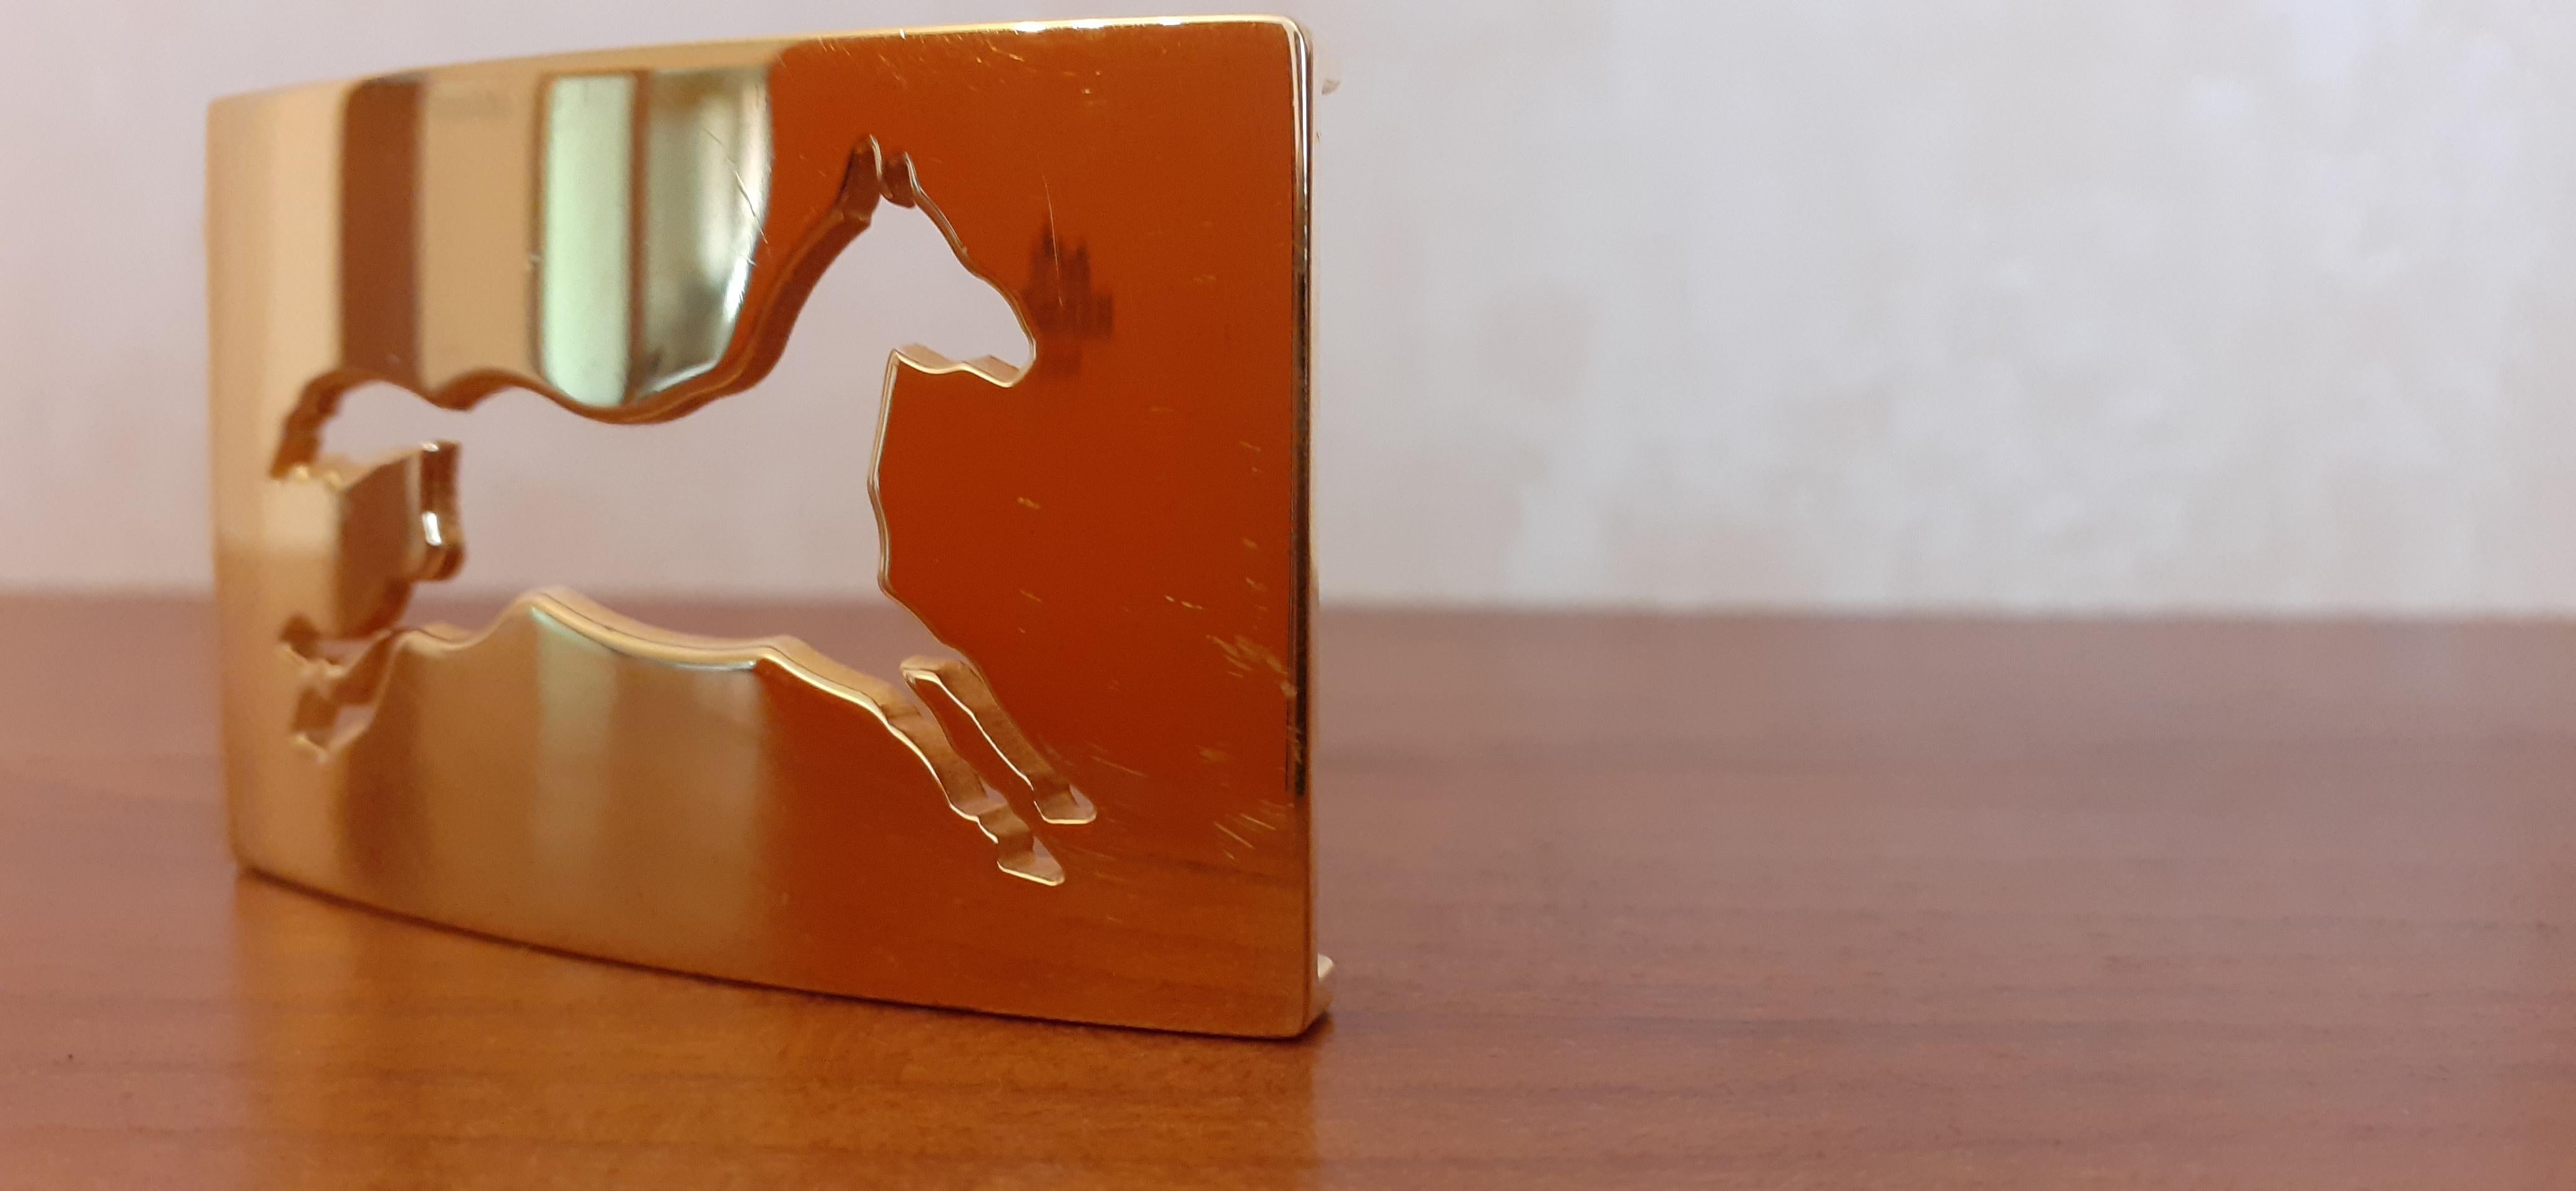 Exceptional Hermès Belt Buckle Horse Shaped in Gold for 32 mm Belt Texas 11